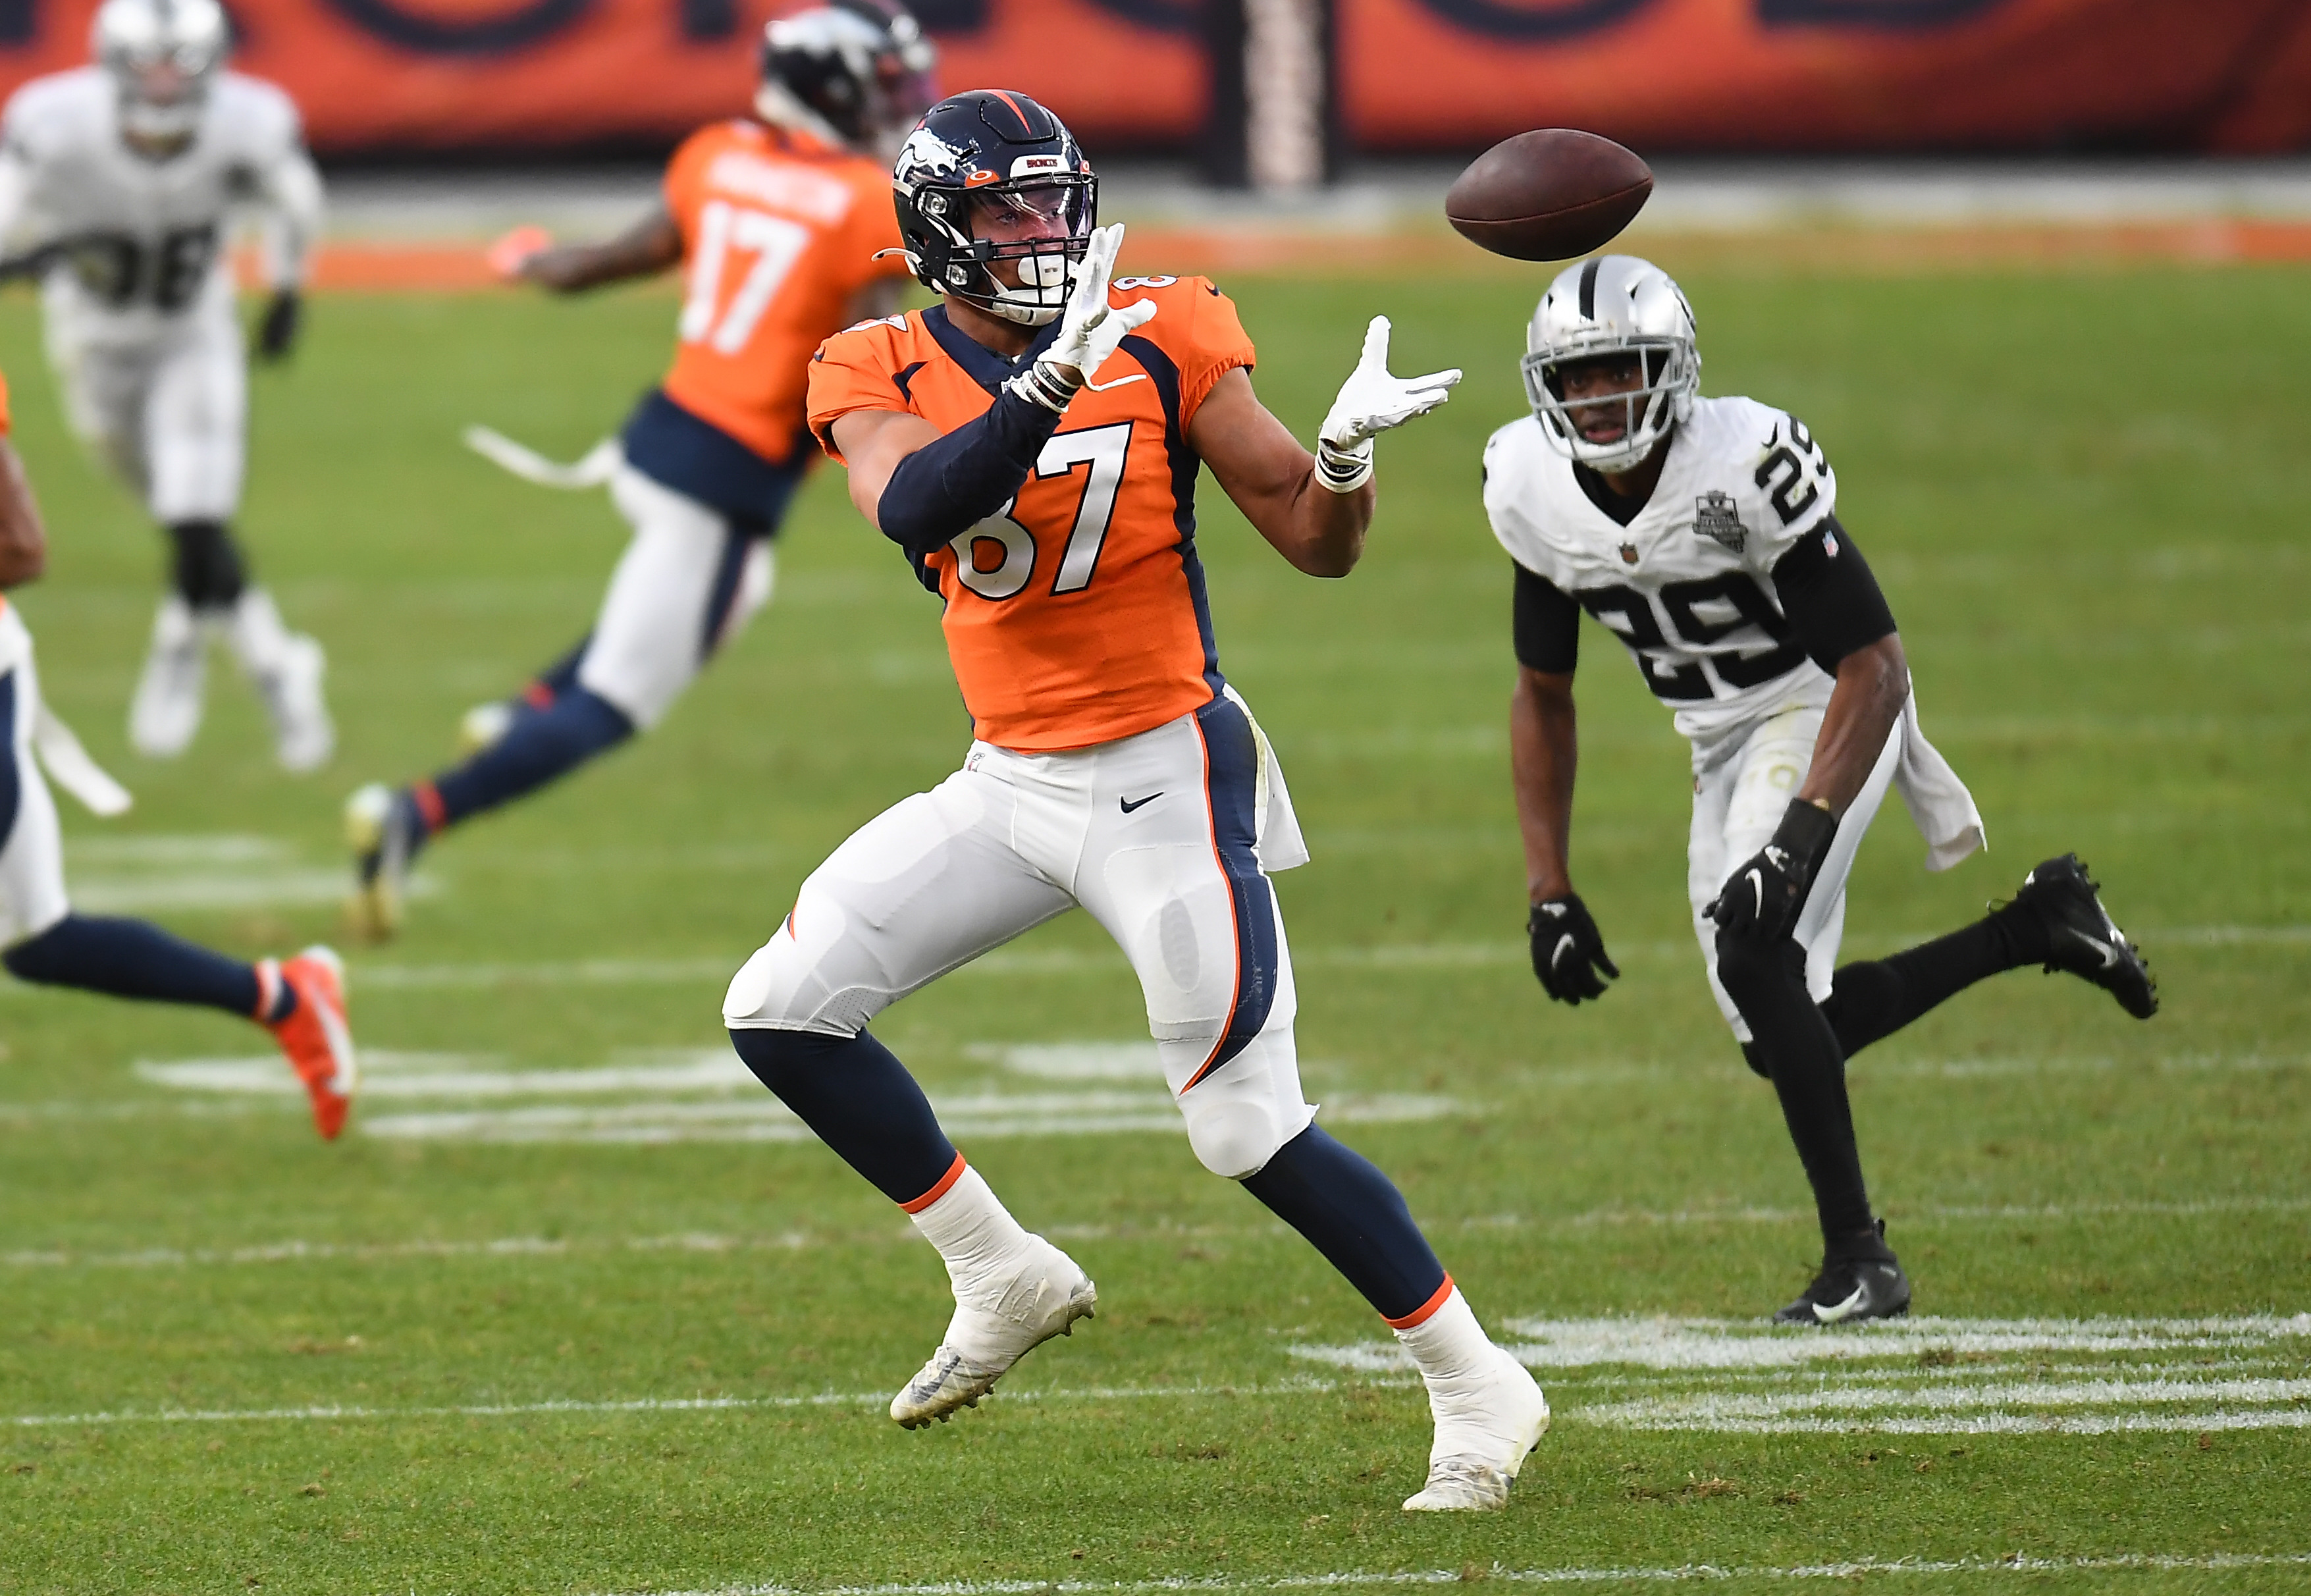 Denver Broncos tight end Noah Fant (87) makes a catch against the Las Vegas Raiders during the second quarter at Empower Field at Mile High.